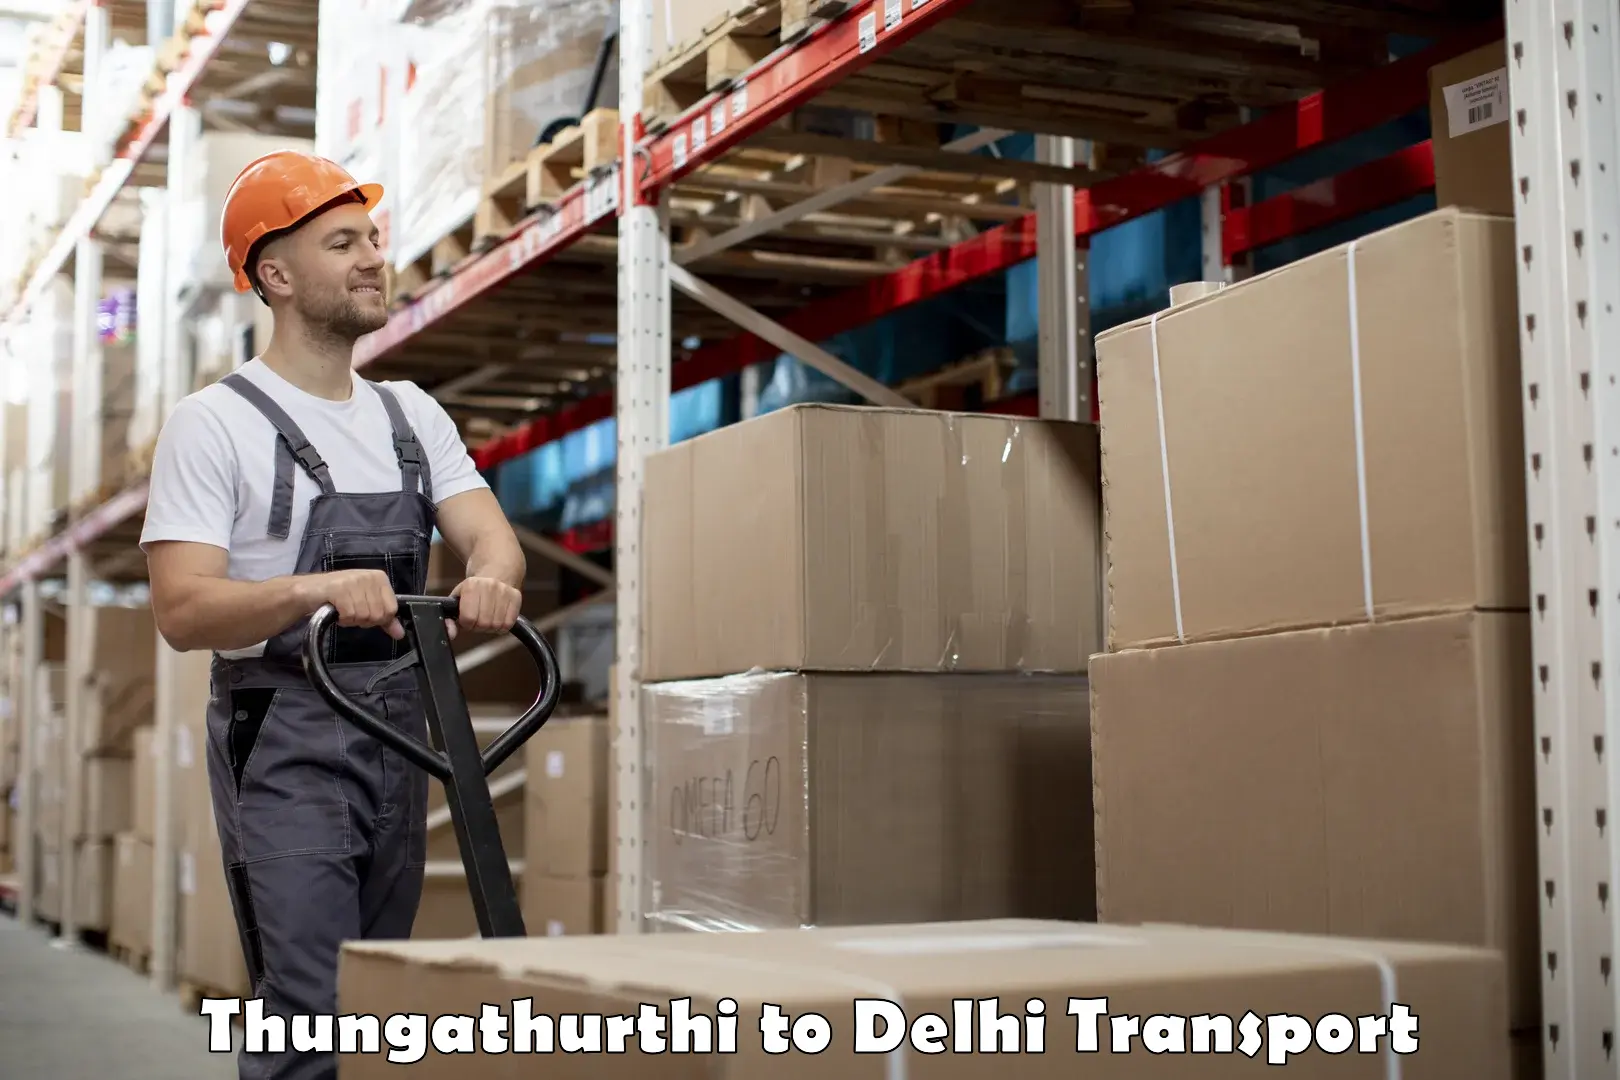 Cycle transportation service in Thungathurthi to IIT Delhi